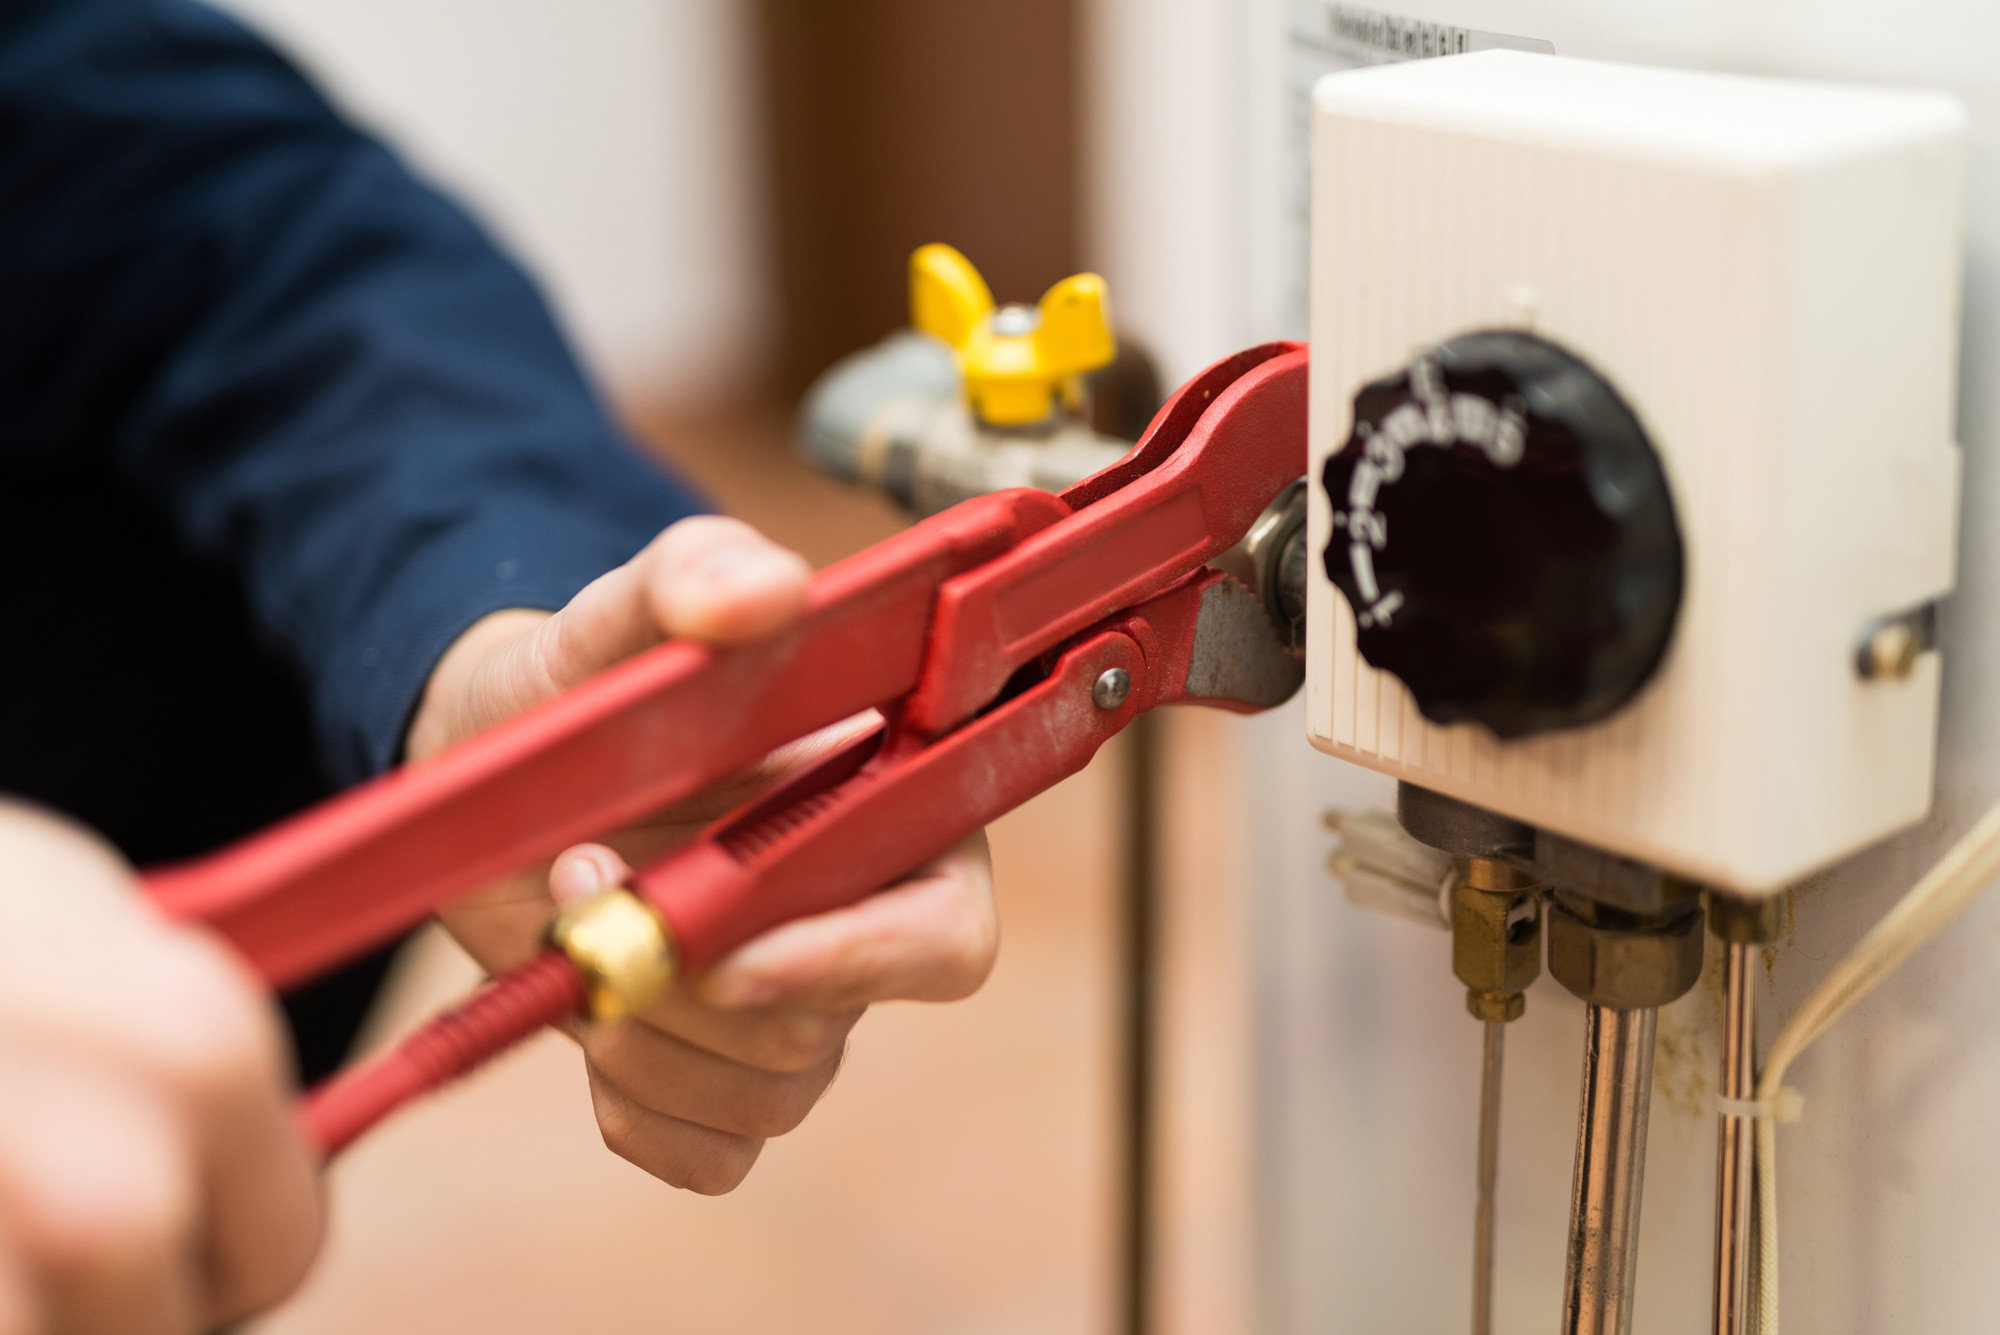 New Year, New Water Heater: Should You Consider a Tankless Water Heater?